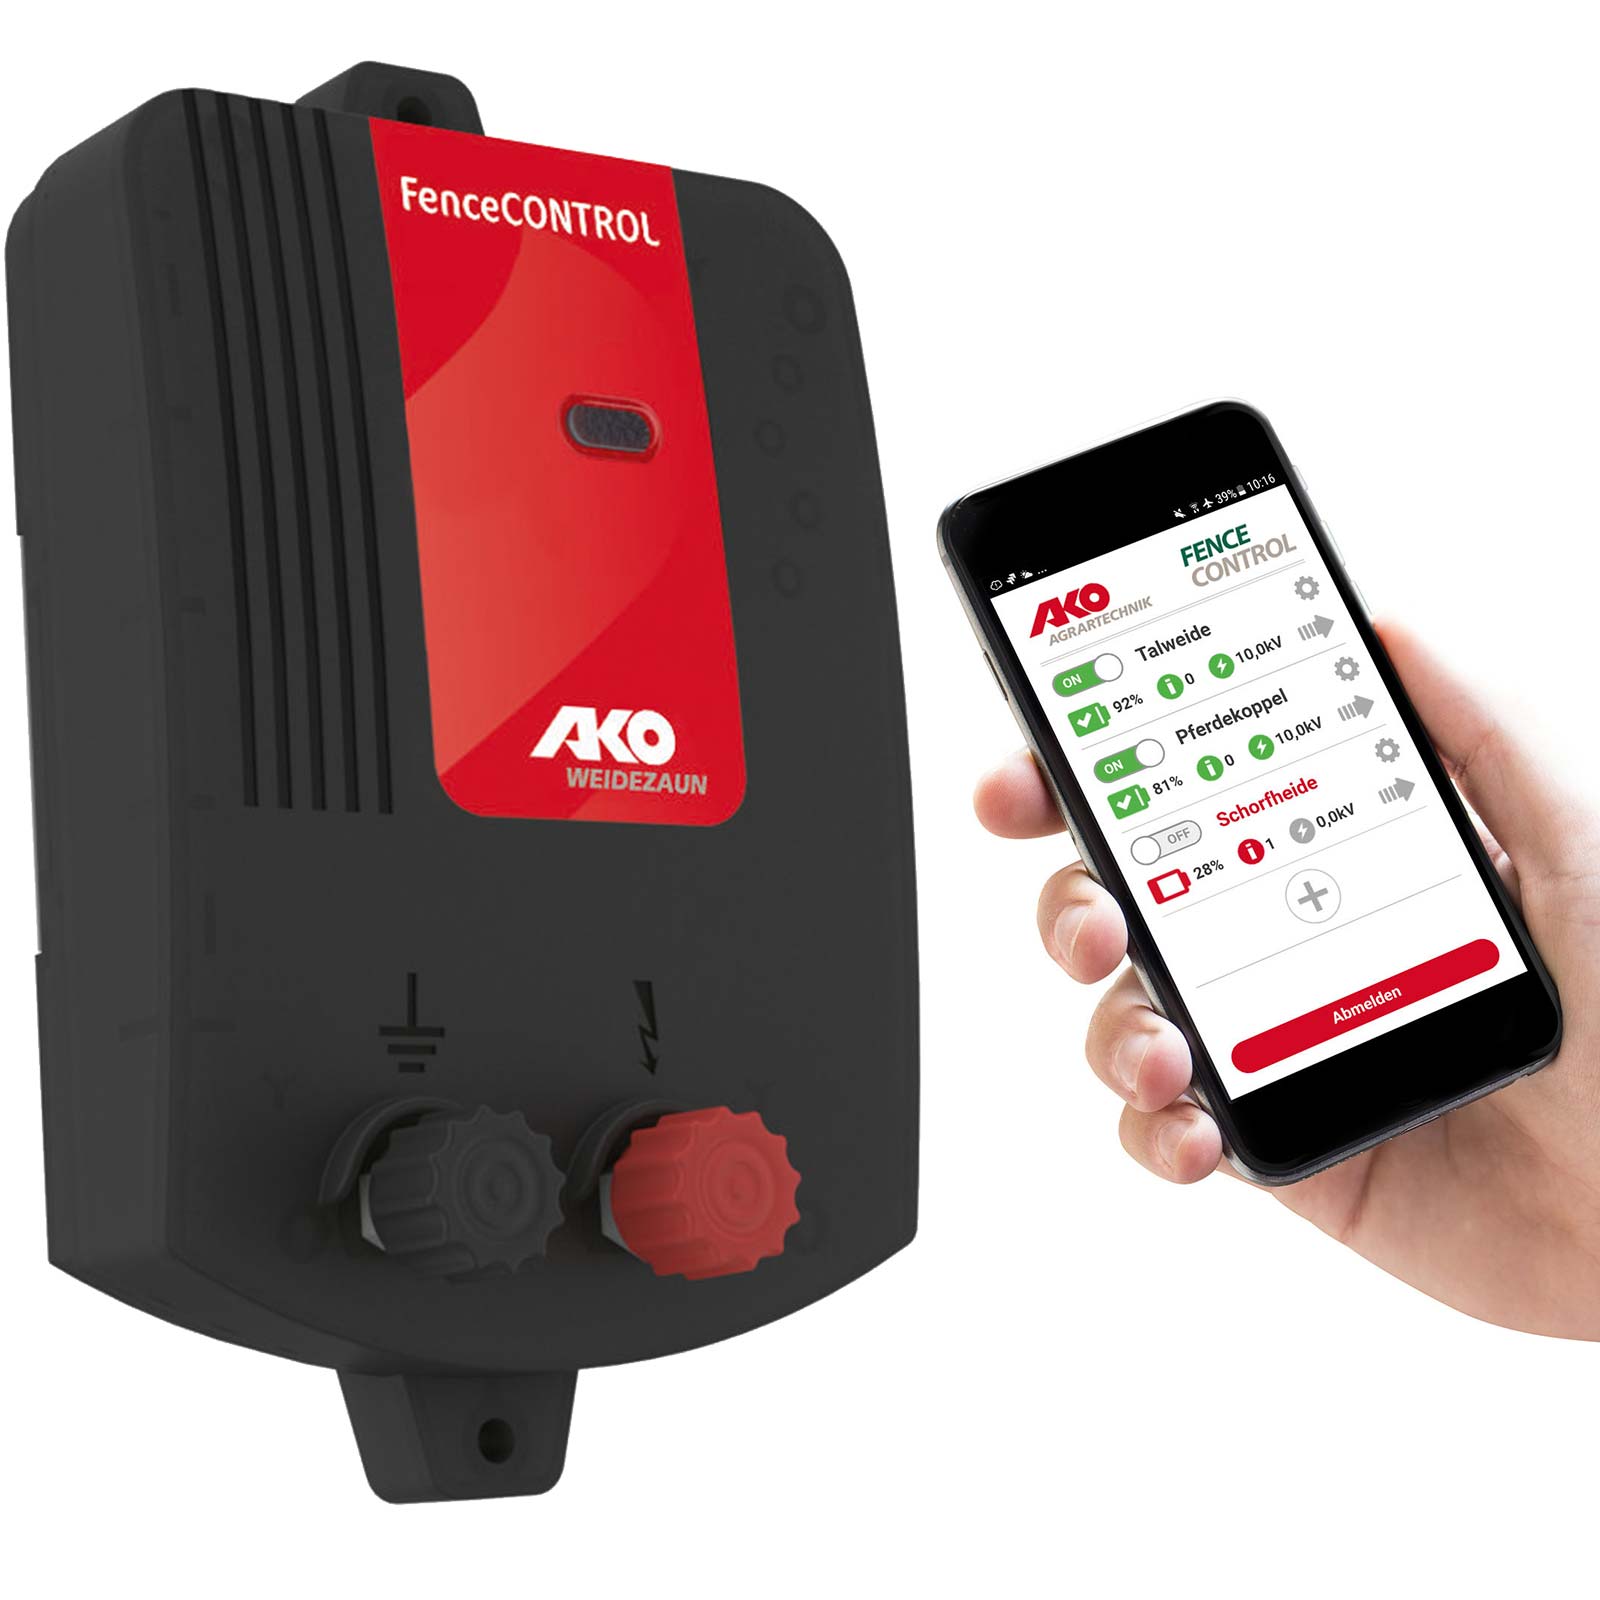 AKO Fence Control mobile monitoring